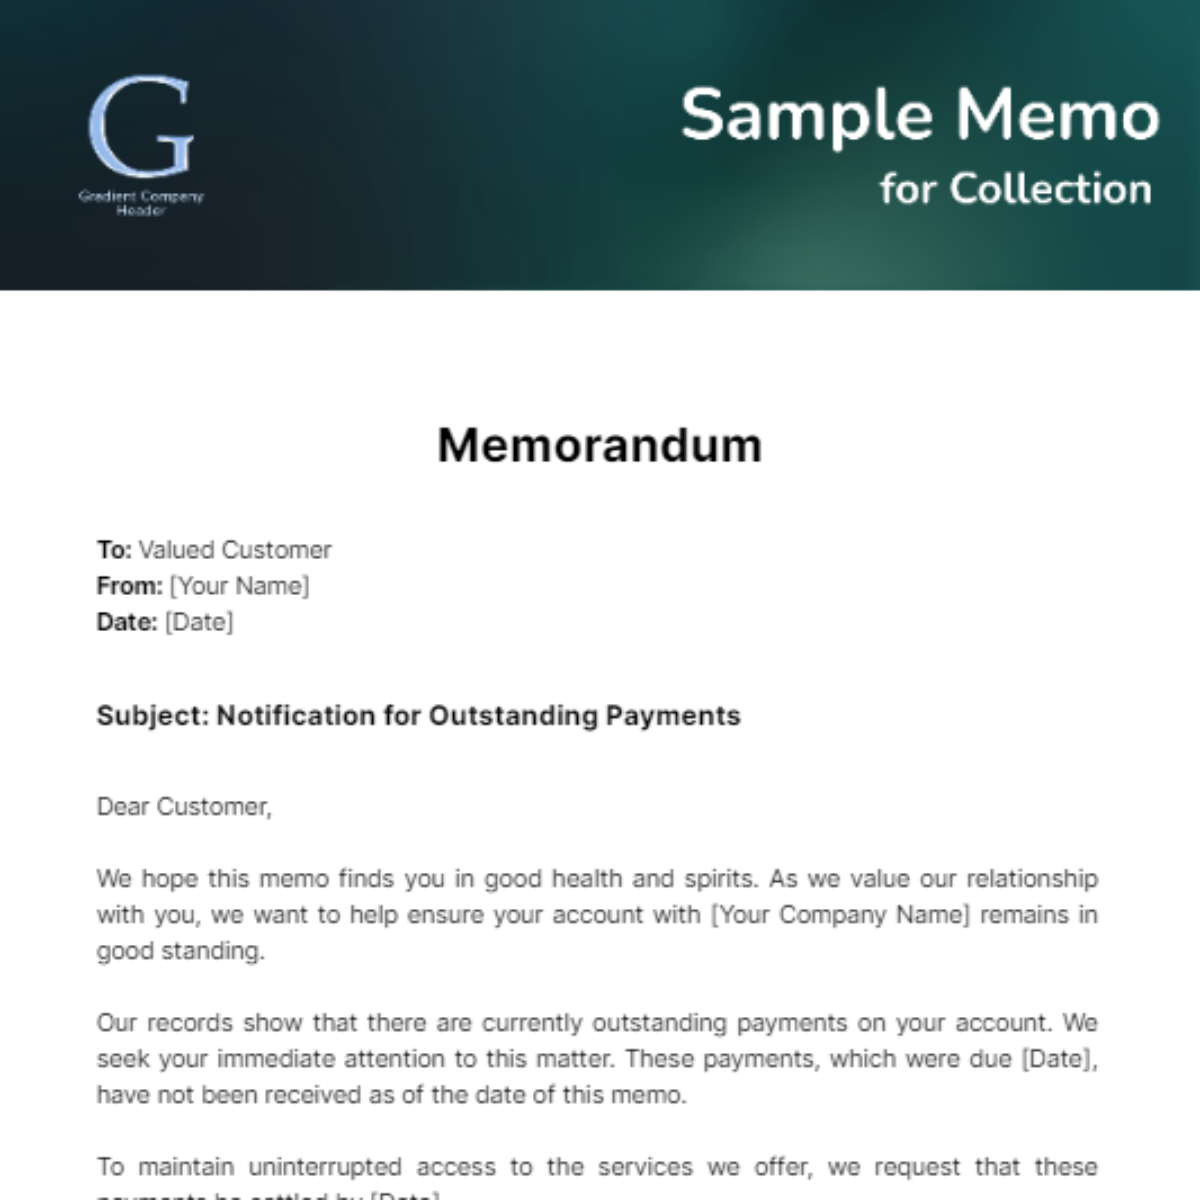 Sample Memo for Collection